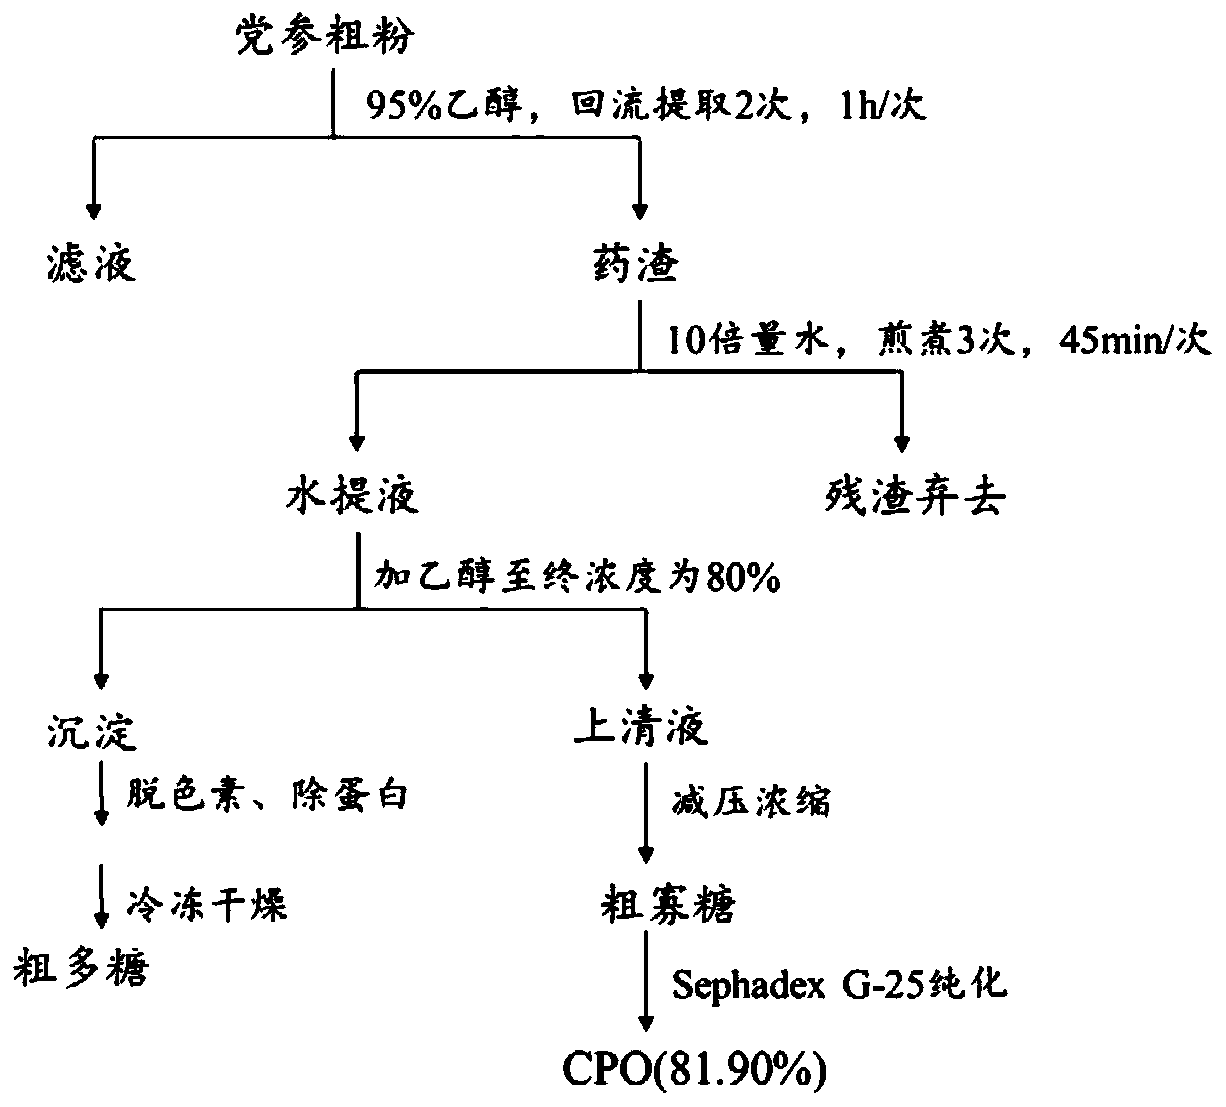 Application of Codonopsis pilosula oligosaccharide in preparation of medicine for preventing or treating gastrointestinal injury caused by anoxia